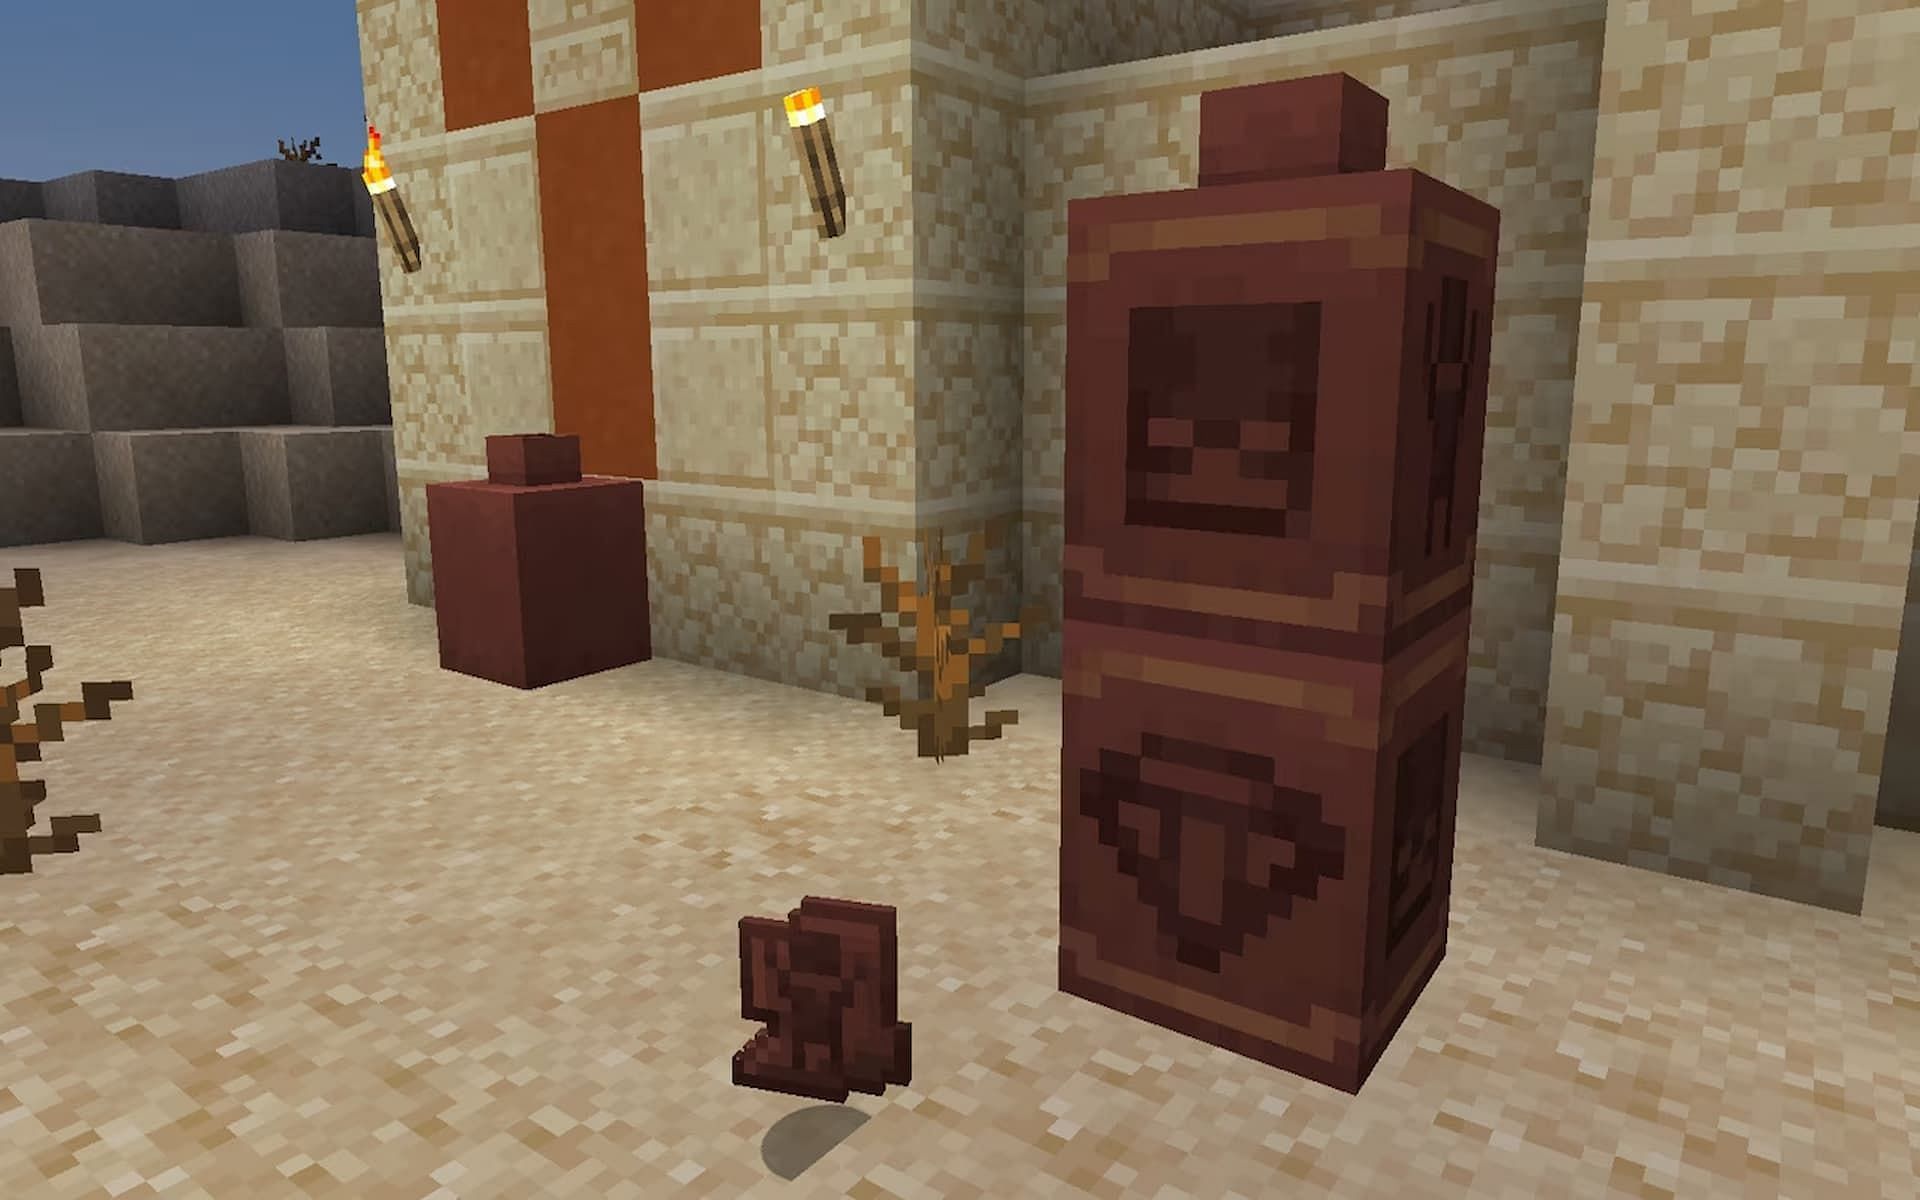 Players can use the brush tool to locate treasures, including pottery shards (Image via Mojang)